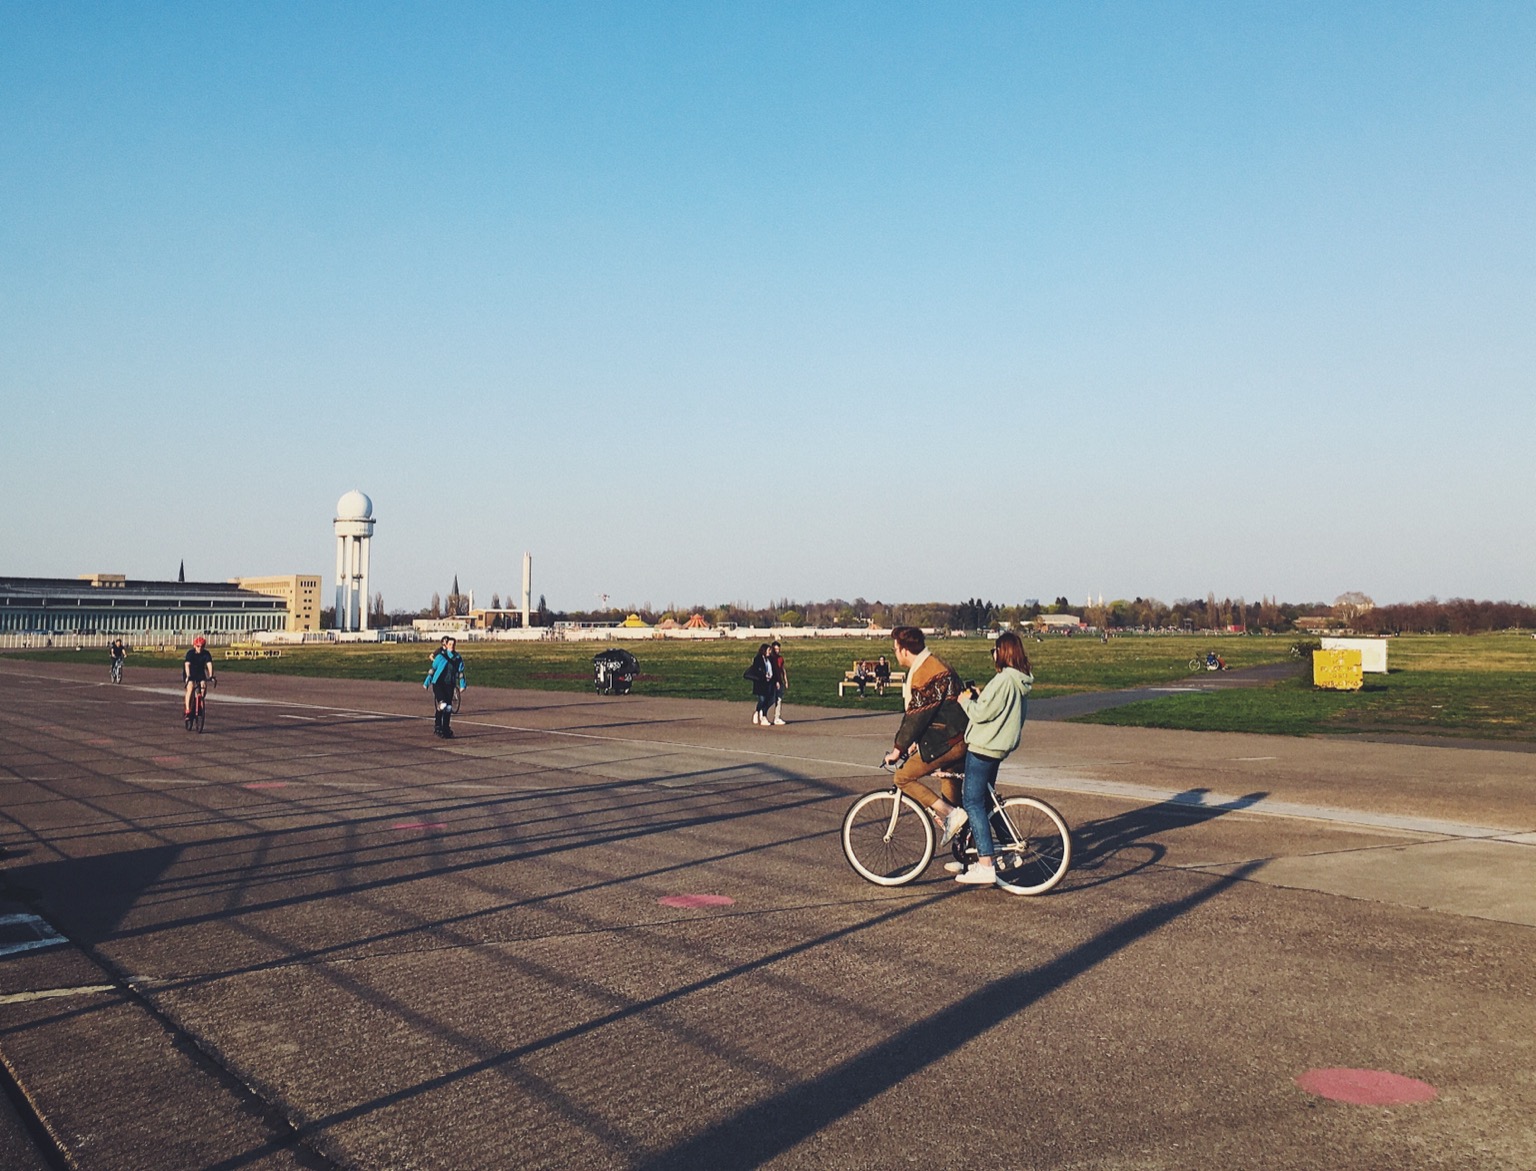 Two people riding a single bike on the old tarmac of Tempelhof Park in Berlin.